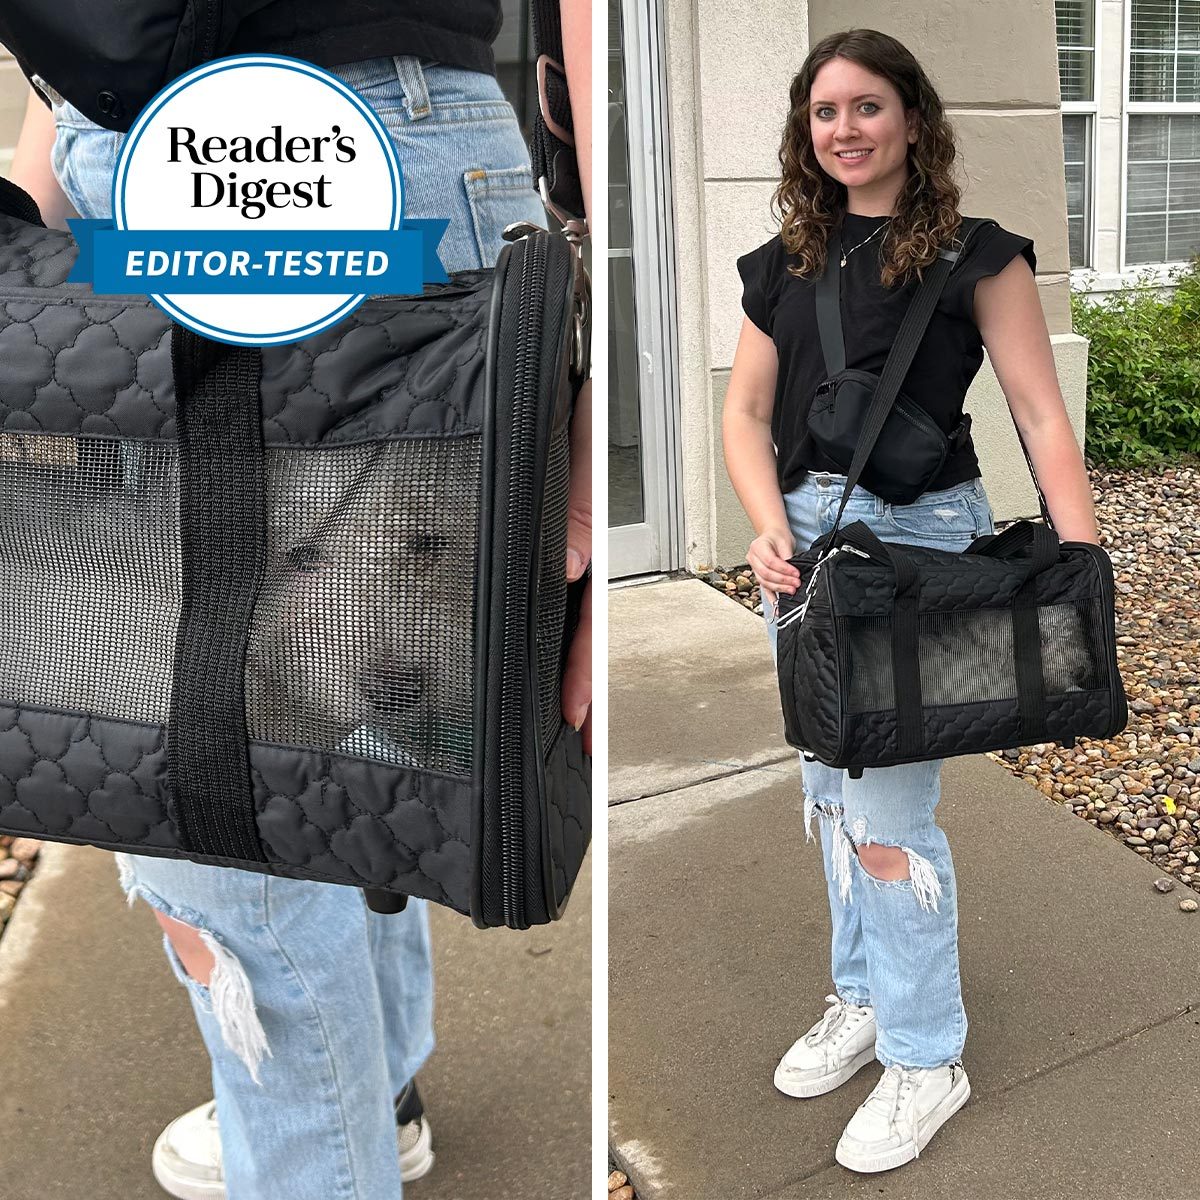 https://www.rd.com/wp-content/uploads/2022/08/RD-Editor-Tested-Sherpa-The-Original-Dog-Carrier-Bag-Madi-Koetting.jpg?fit=700%2C700